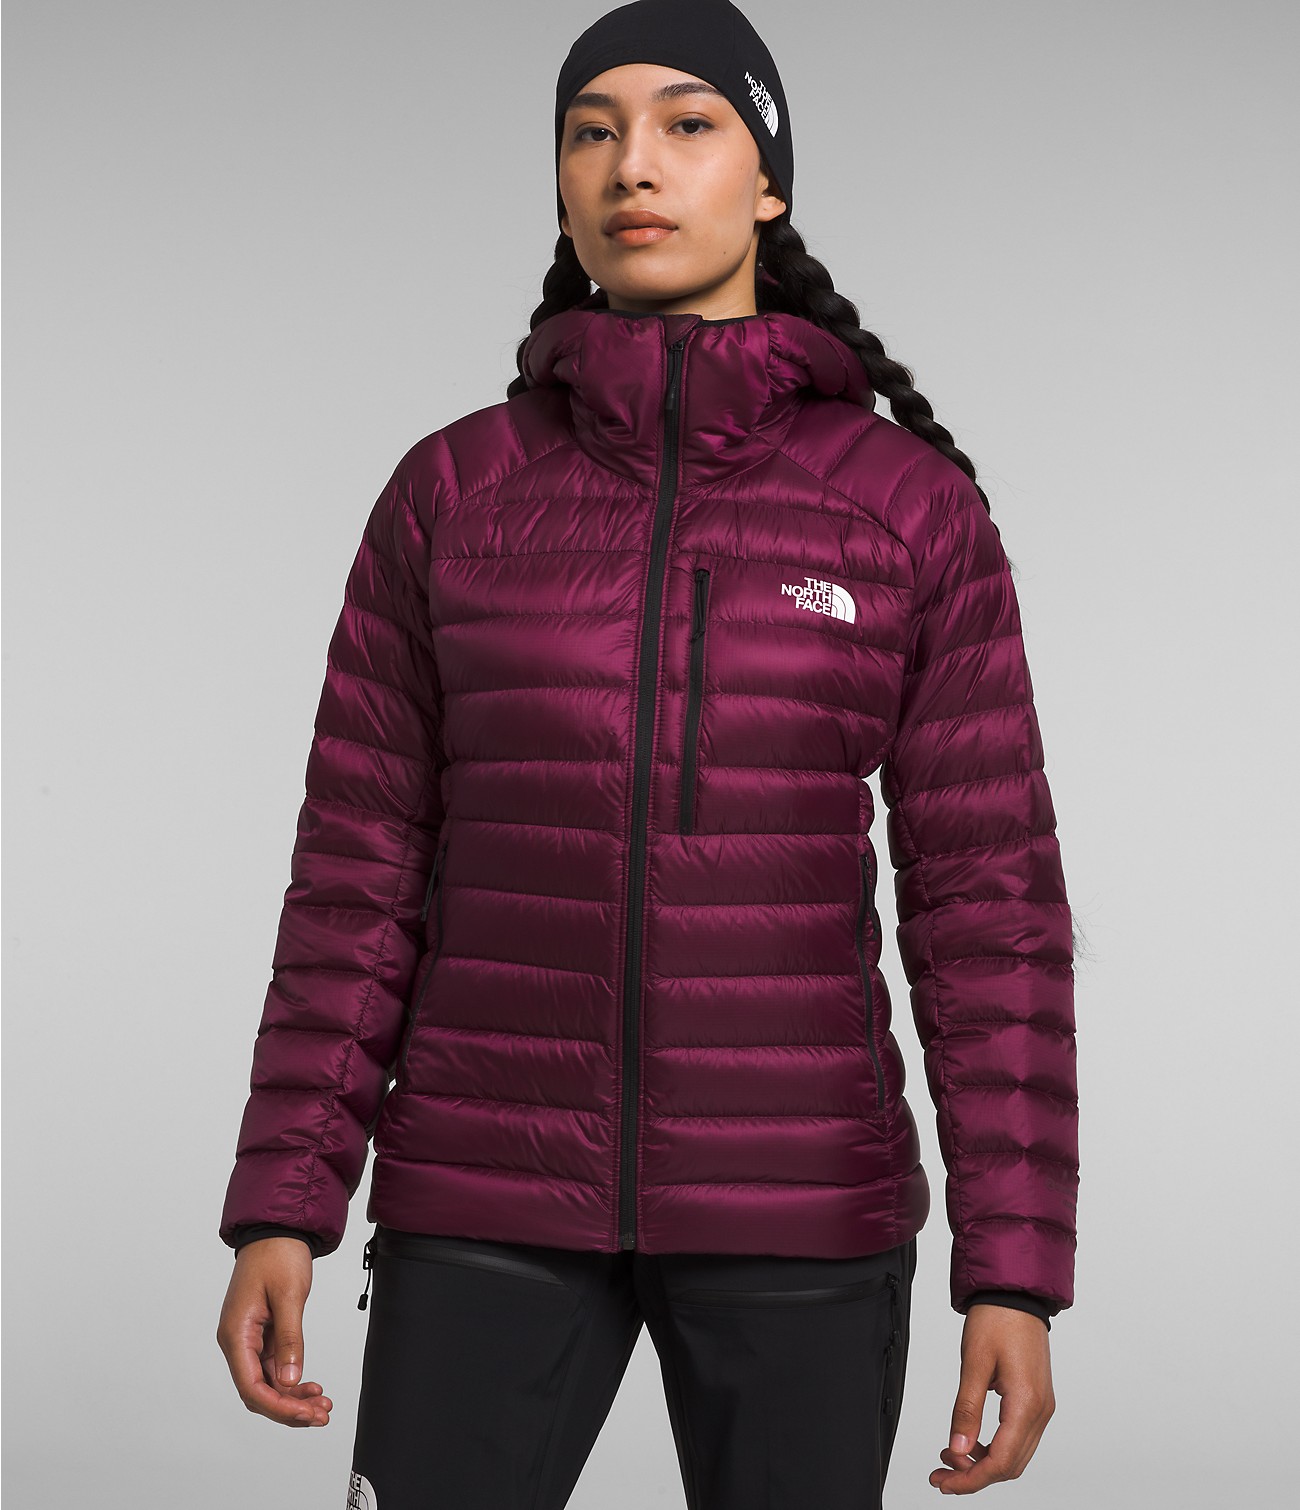 Unlock Wilderness' choice in the KÜHL Vs North Face comparison, the Summit Series Breithorn Hoodie by The North Face